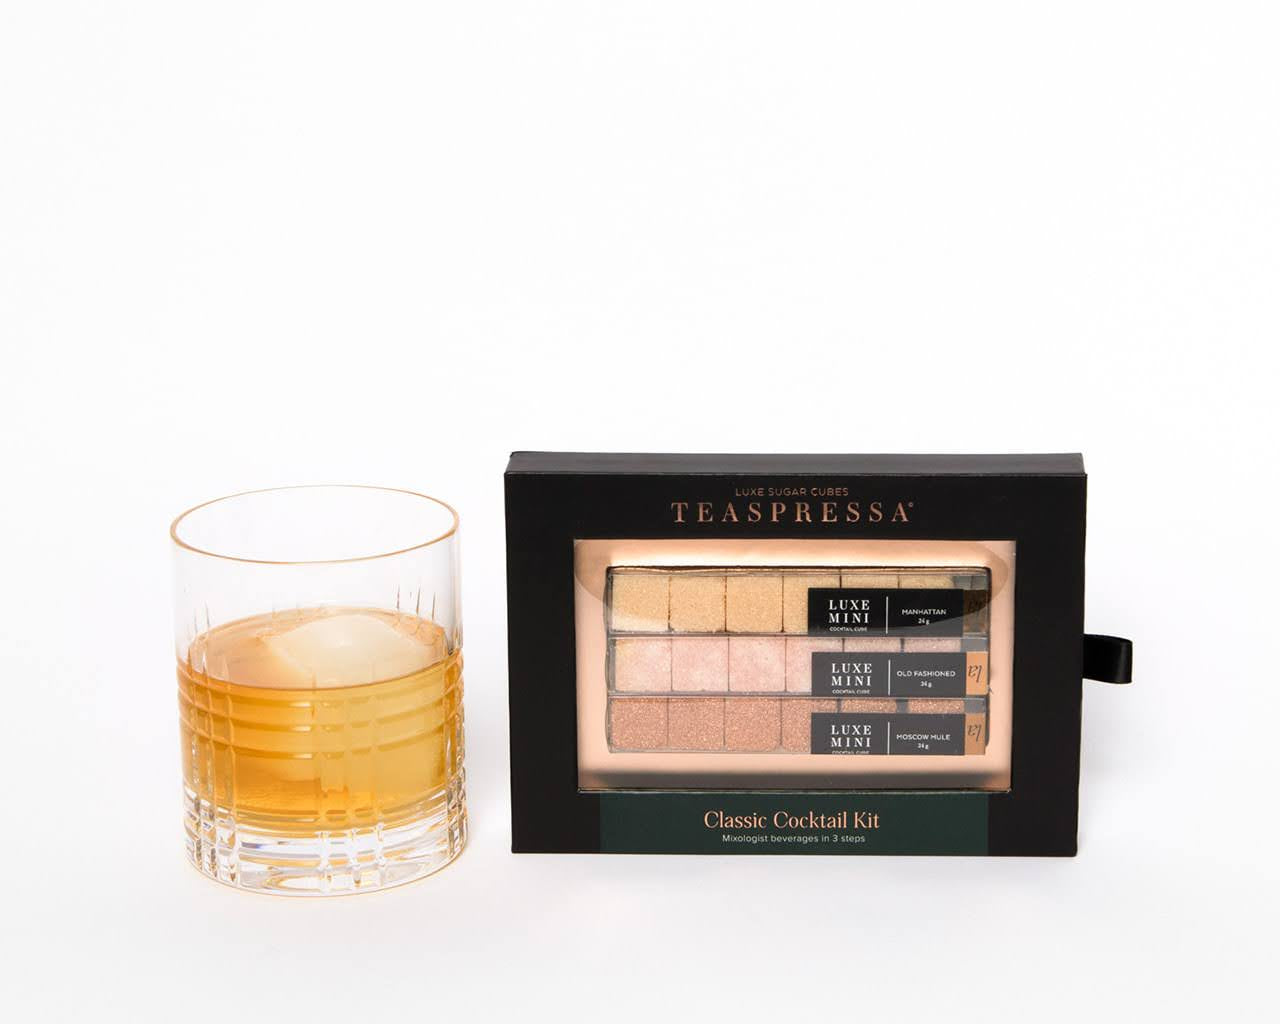 Luxury Classic Cocktail Kit by Teaspressa showing cubes in sophisticated black packaging sitting next to cocktail with ice cube ball. White background.